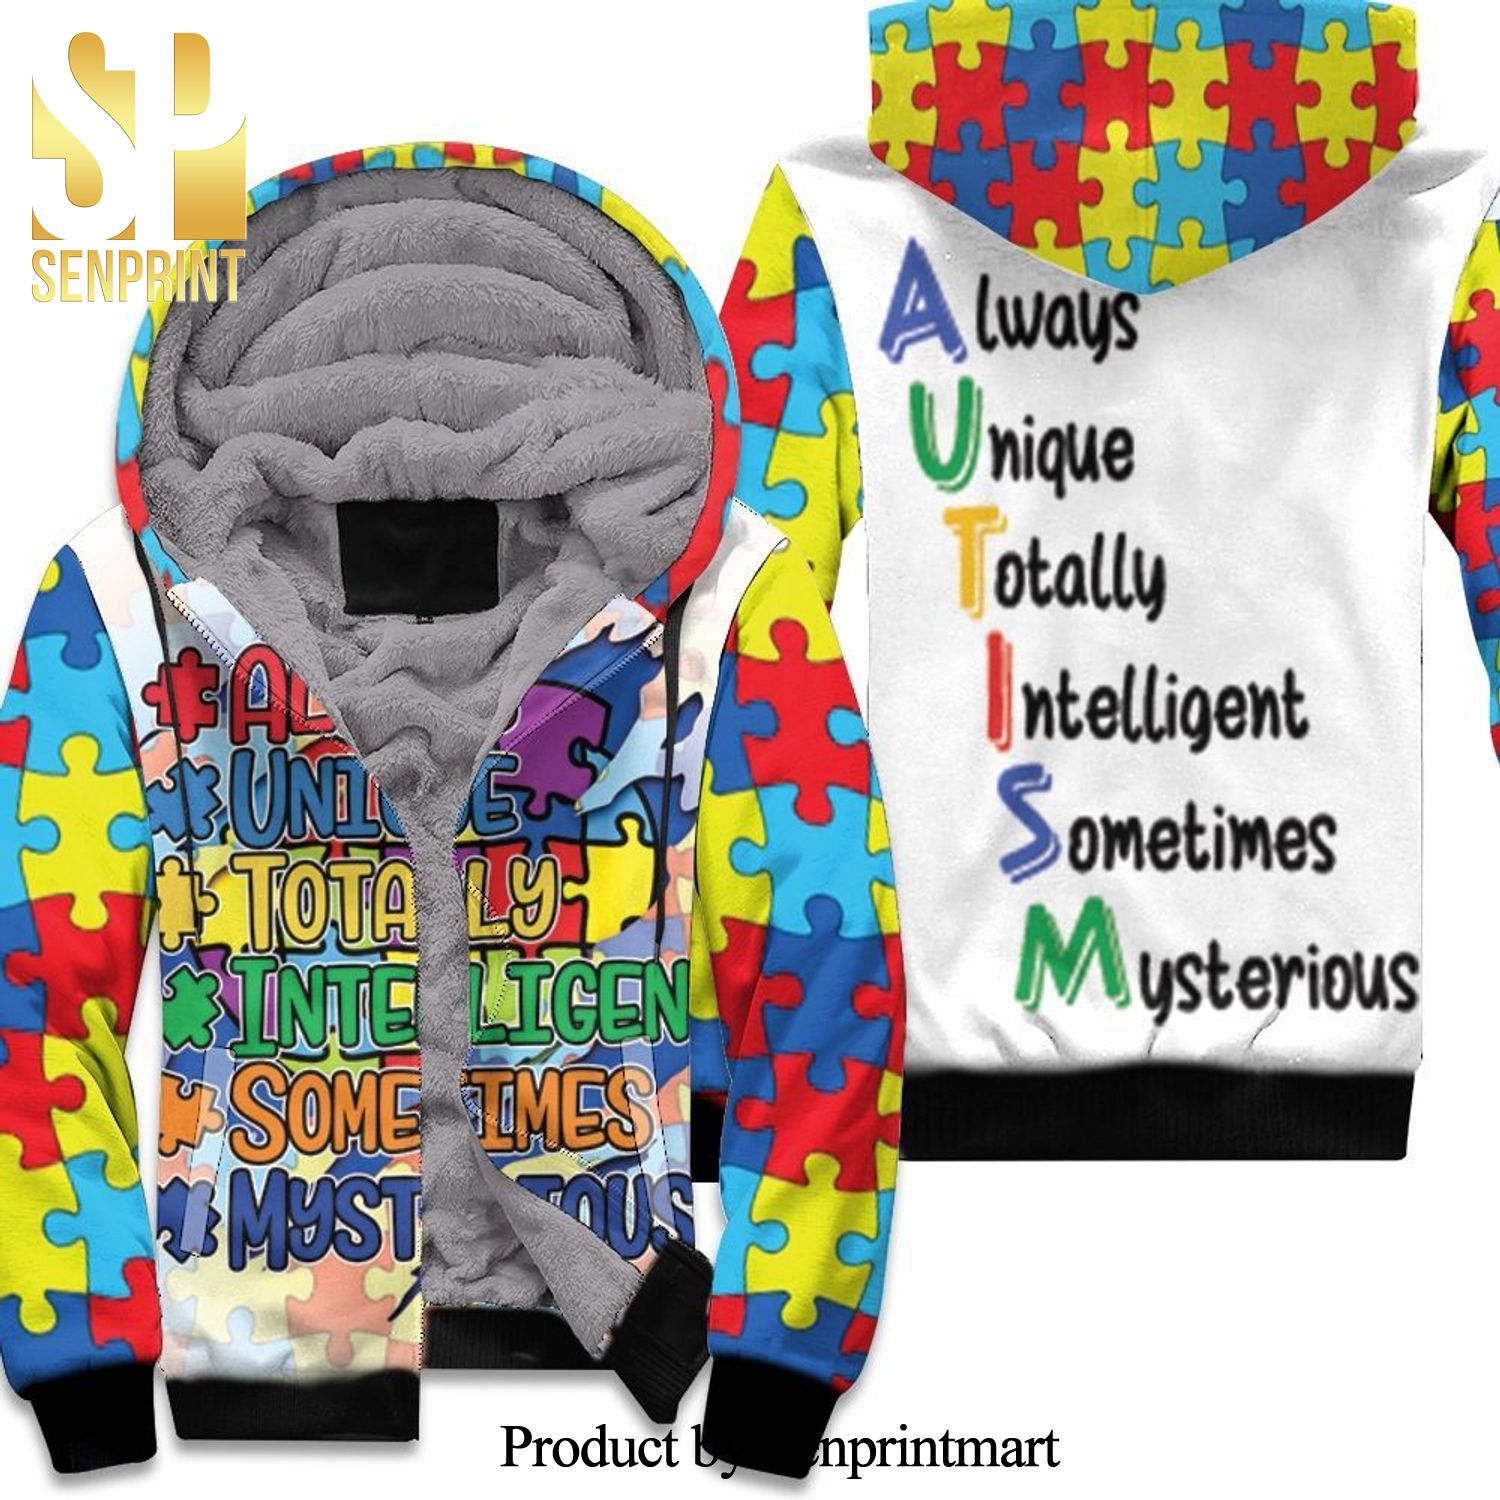 Alaways Unique Totally Intelligent Sometimes Mysterious Hot Version All Over Printed Unisex Fleece Hoodie